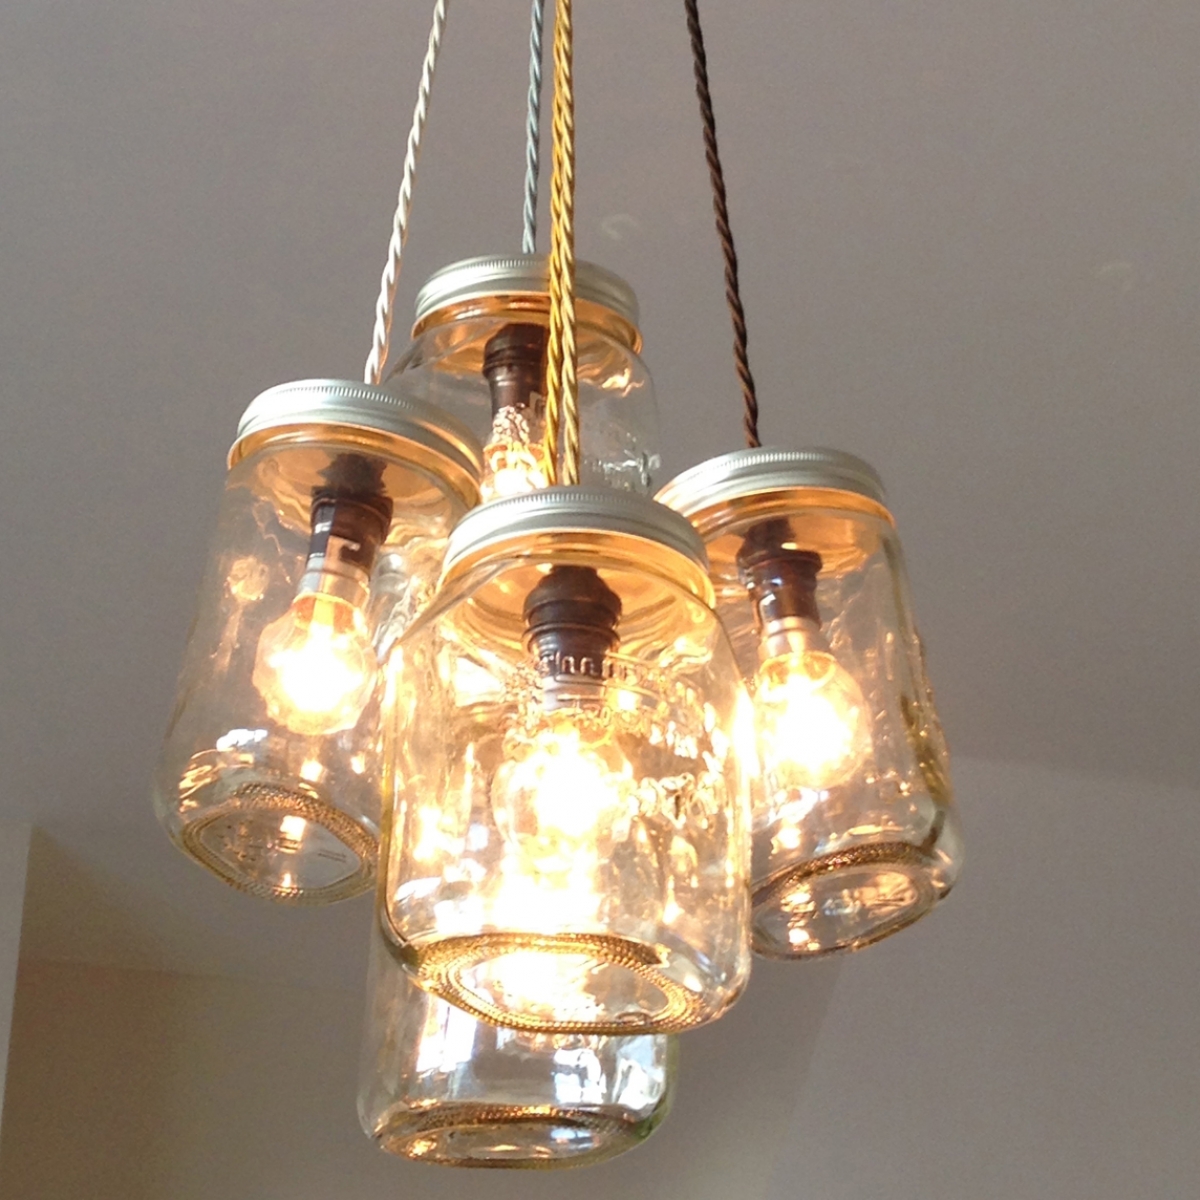 Jam jar upcycled chandelier from the great interior design challenge